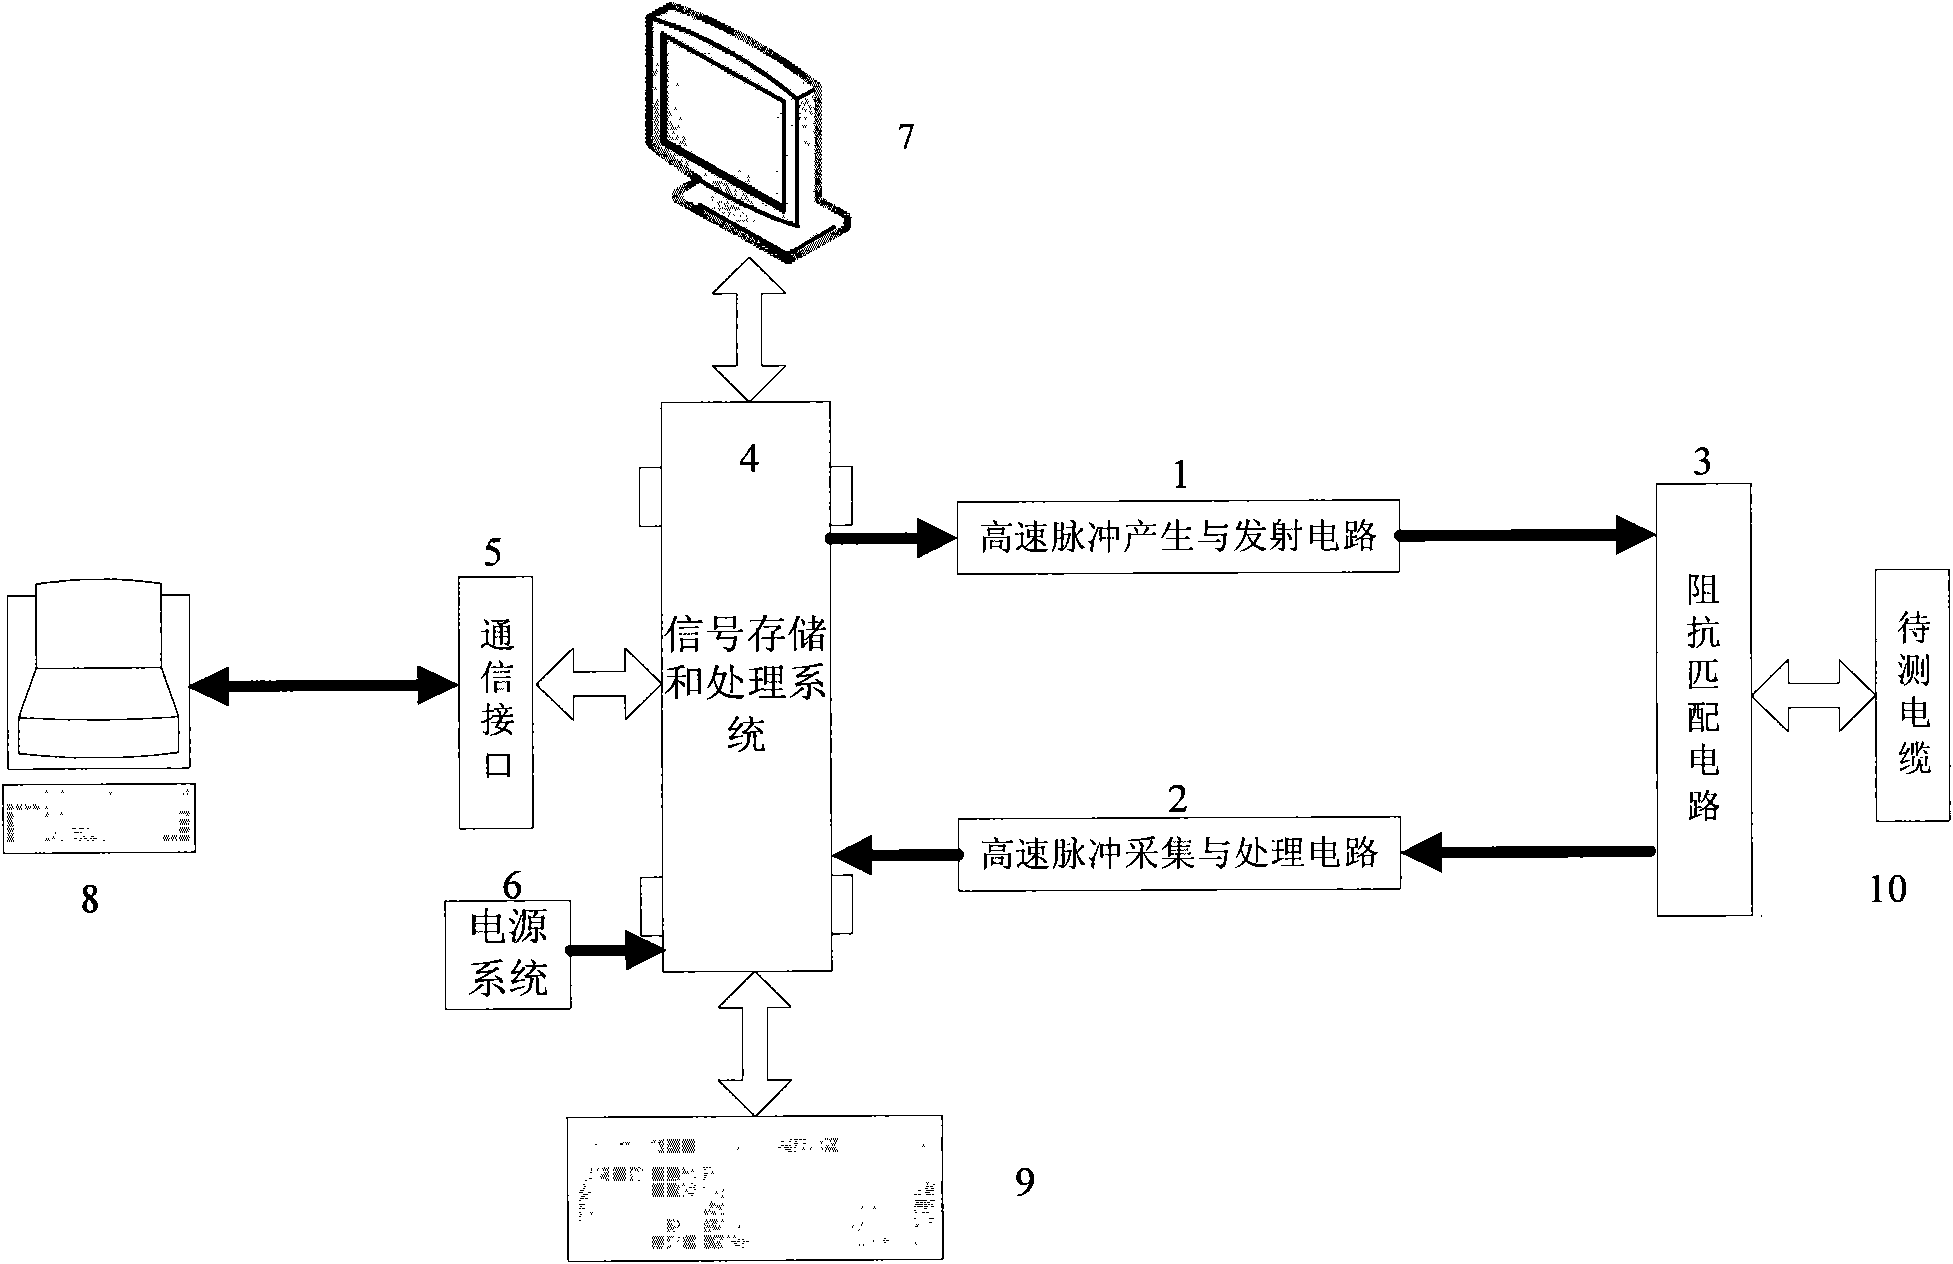 Plane cable fault locator based on time domain reflection